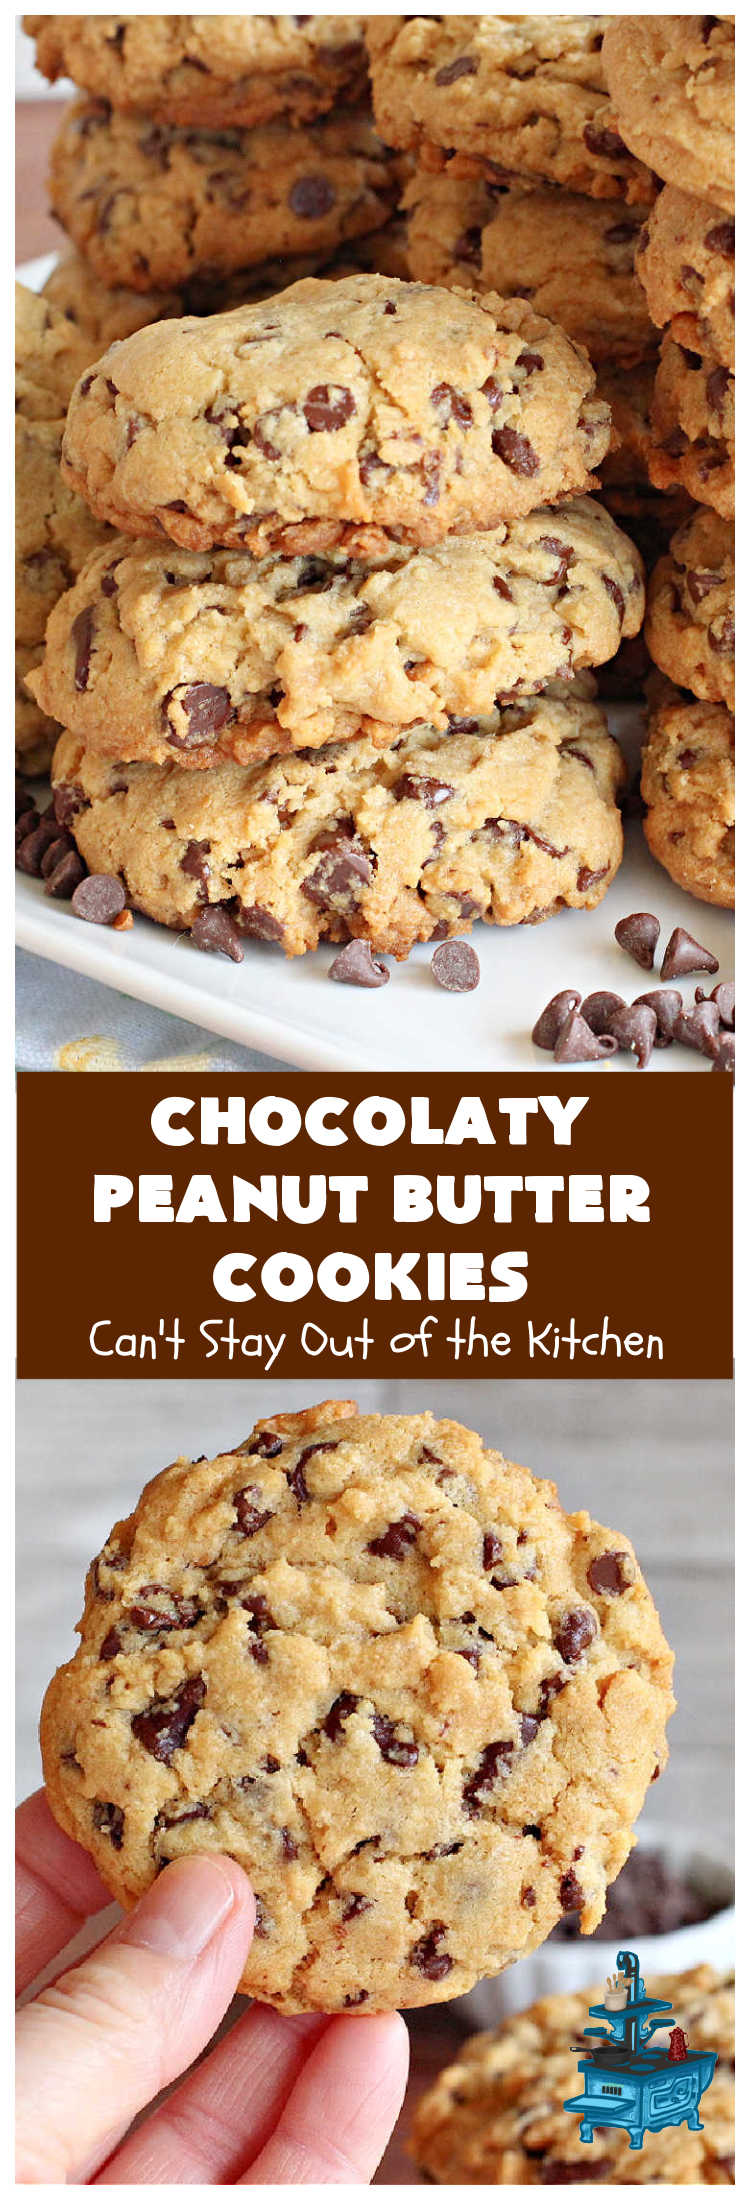 Chocolaty Peanut Butter Cookies | Can't Stay Out of the Kitchen | You'll be drooling from the first bite after one taste of these spectacular #PeanutButterCookies. These include miniature #ChocolateChips so they're loaded with #chocolate & #PeanutButter flavor. Great for #tailgating, potlucks, backyard BBQs & #holiday #baking. Be prepared to swoon! You're gonna want seconds. #HolidayDessert #dessert #ChristmasCookieExchange #cookies #ChocolateDessert #PeanutButterDessert #ChocolatyPeanutButterCookies